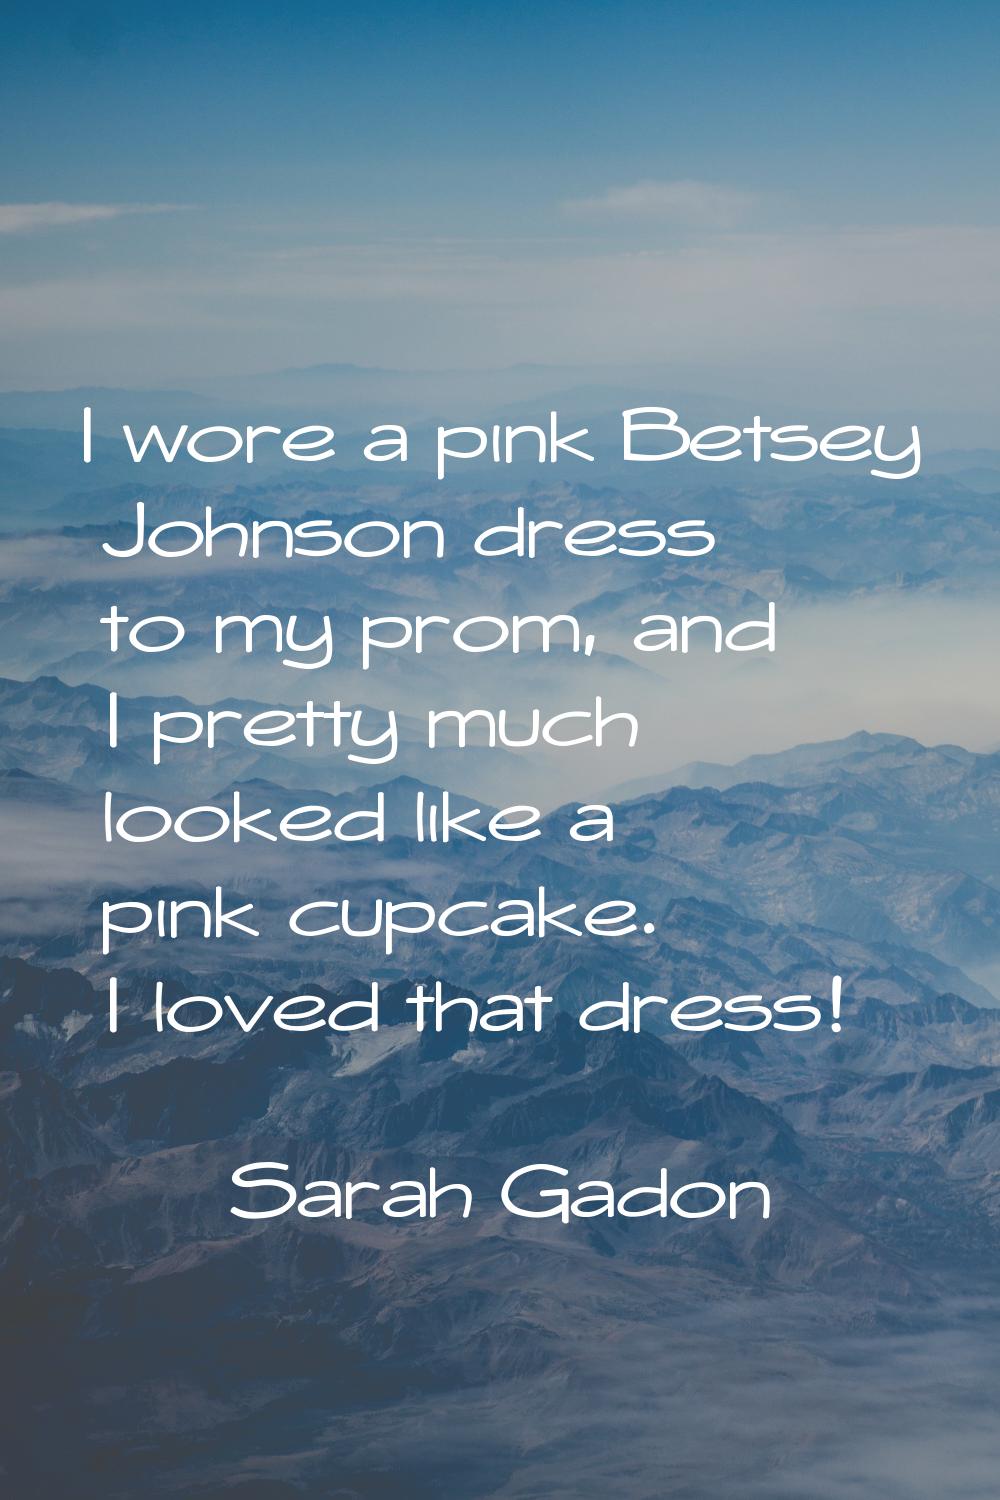 I wore a pink Betsey Johnson dress to my prom, and I pretty much looked like a pink cupcake. I love